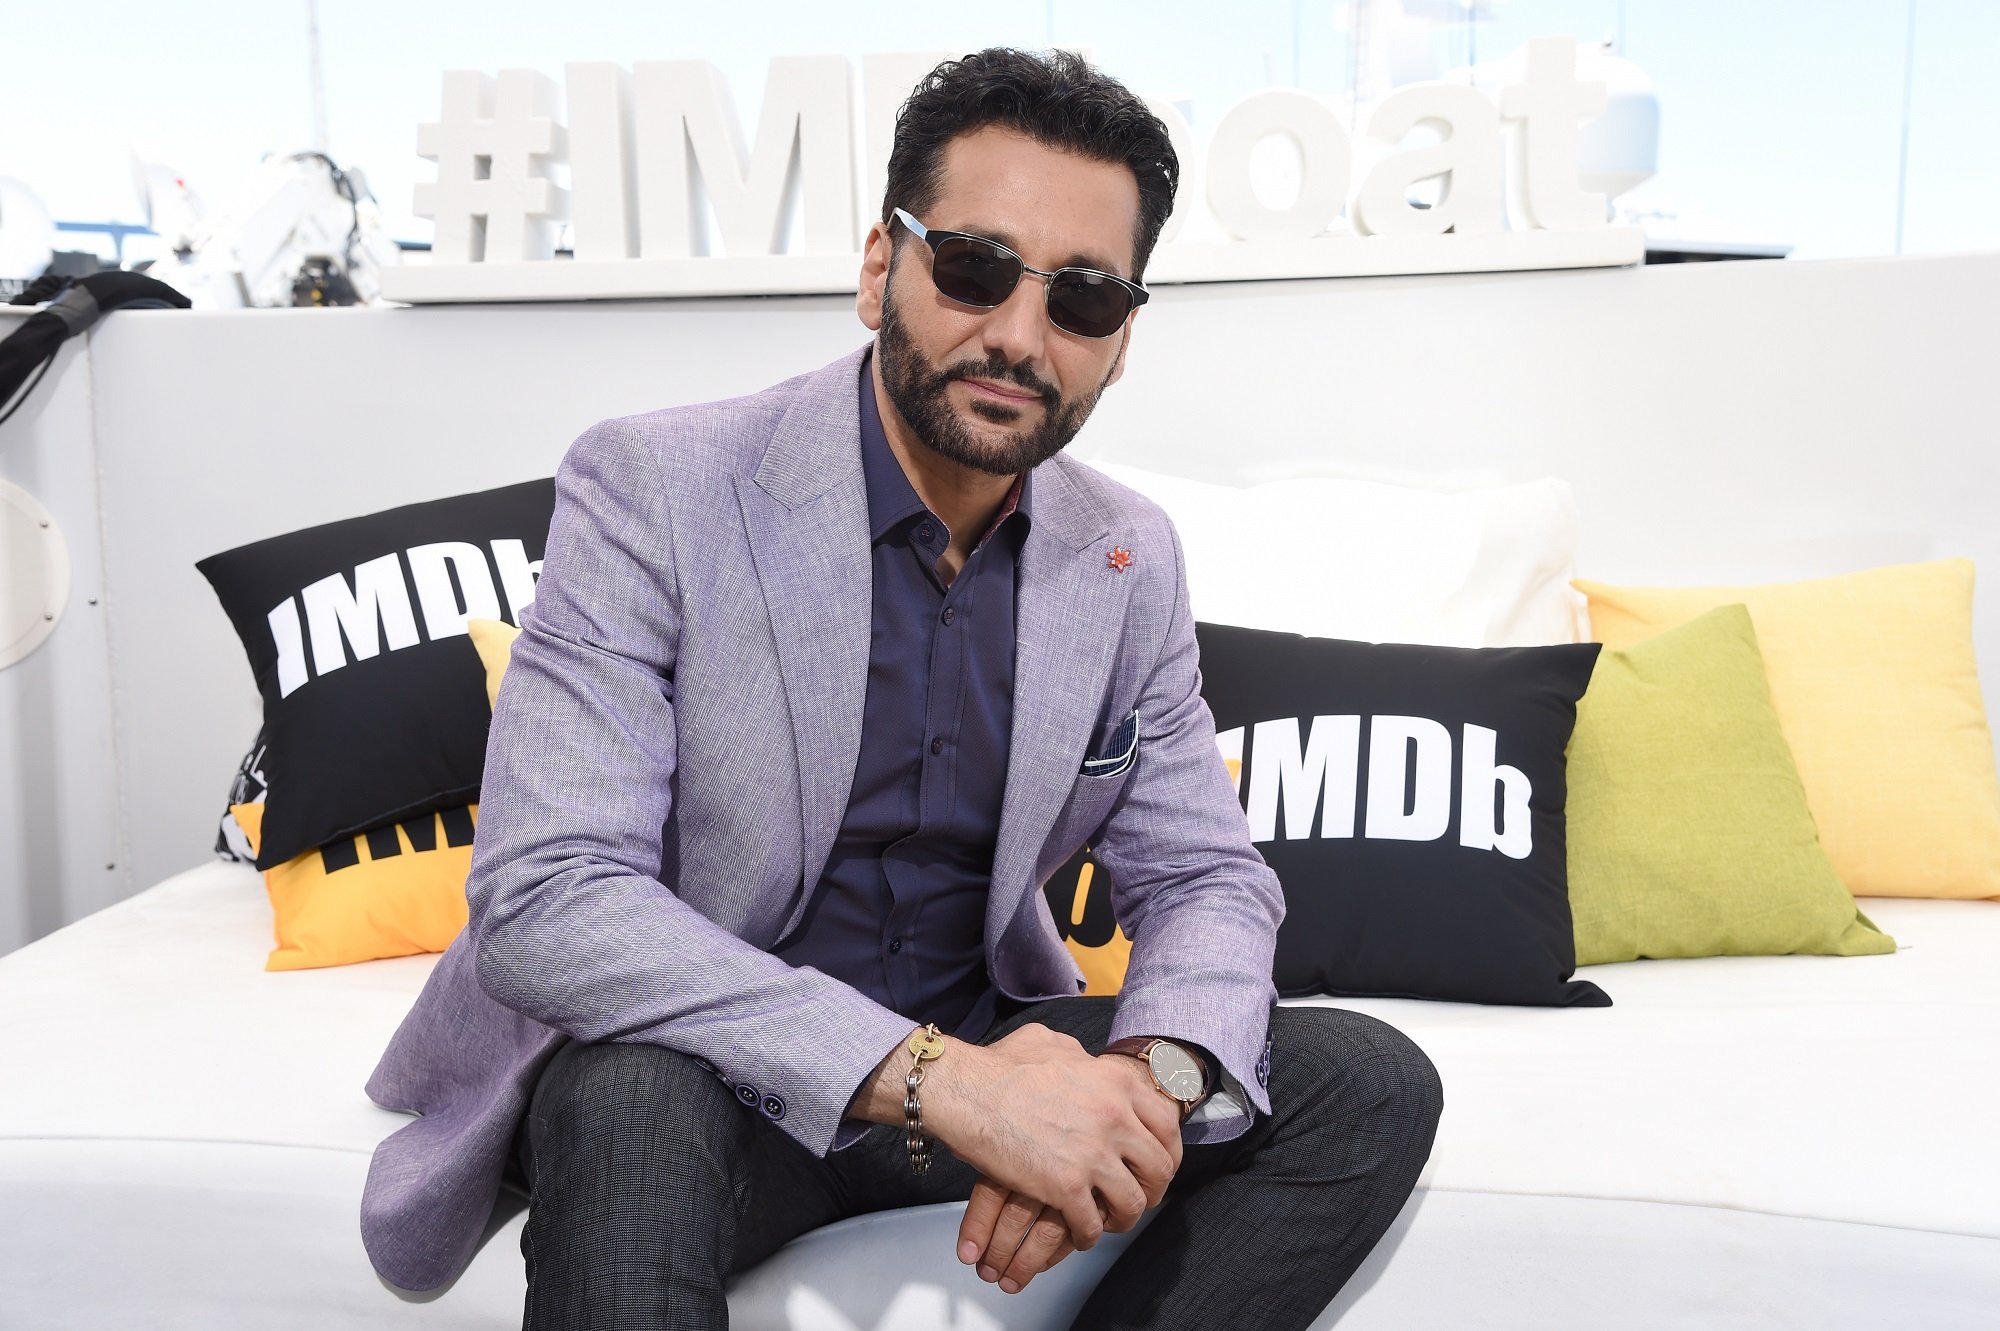 The Expanse cast member Cas Anvar was removed from The Expanse Season 6 